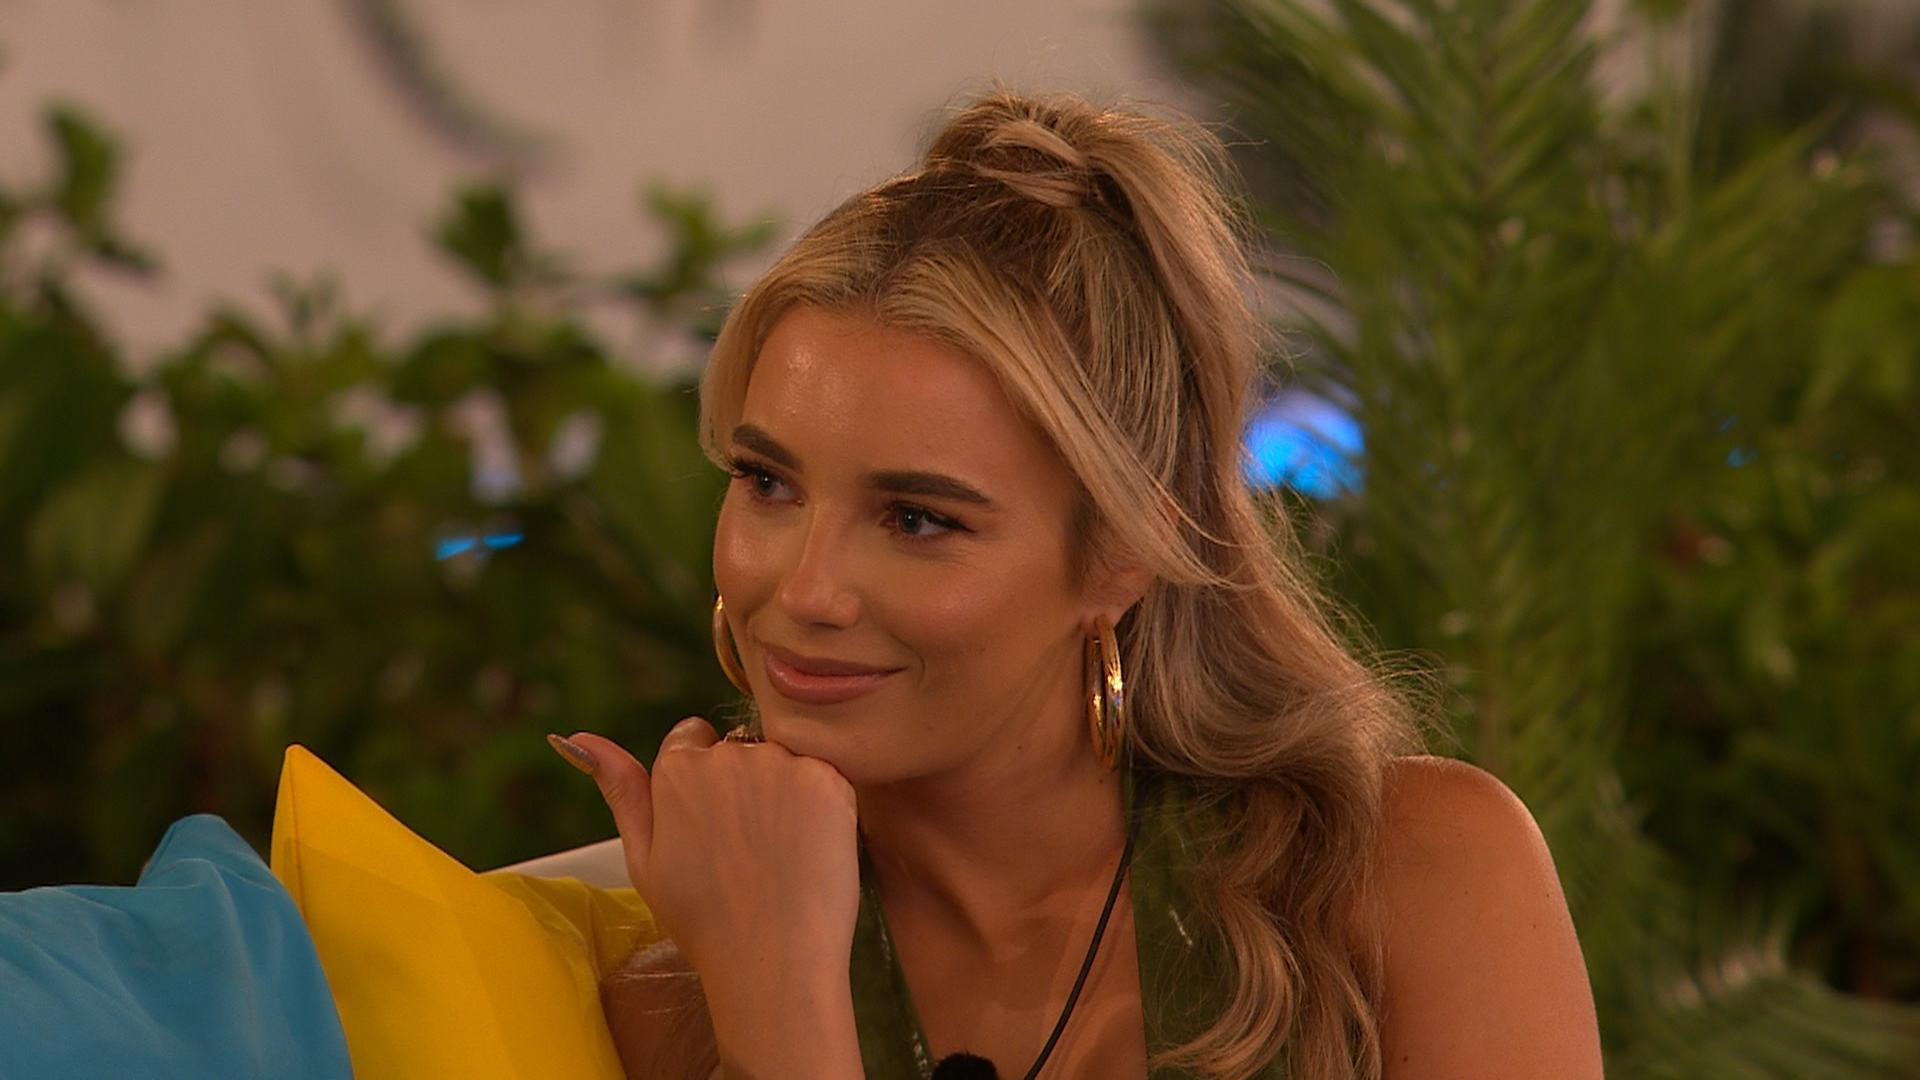 Love Island viewers call on producers to step in after Lana suffers